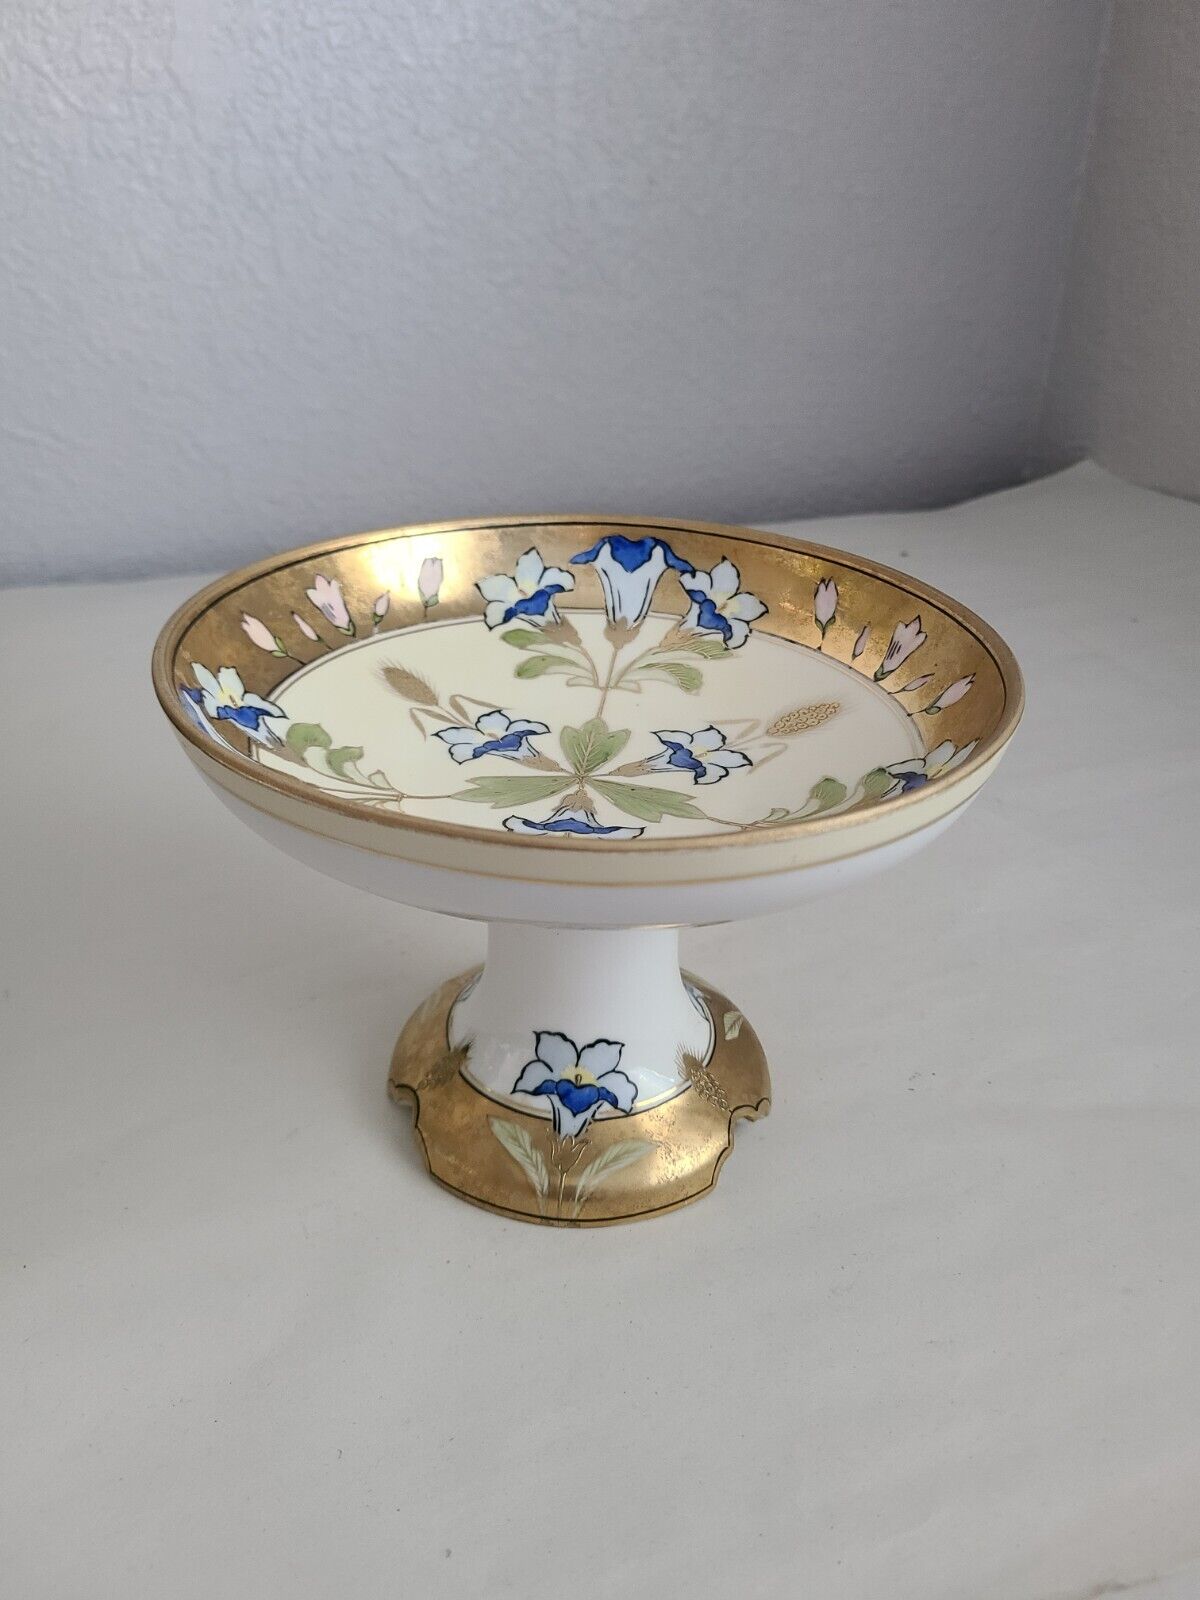 Noritake Hand Painted M Footed Bowl, Made In Japan 